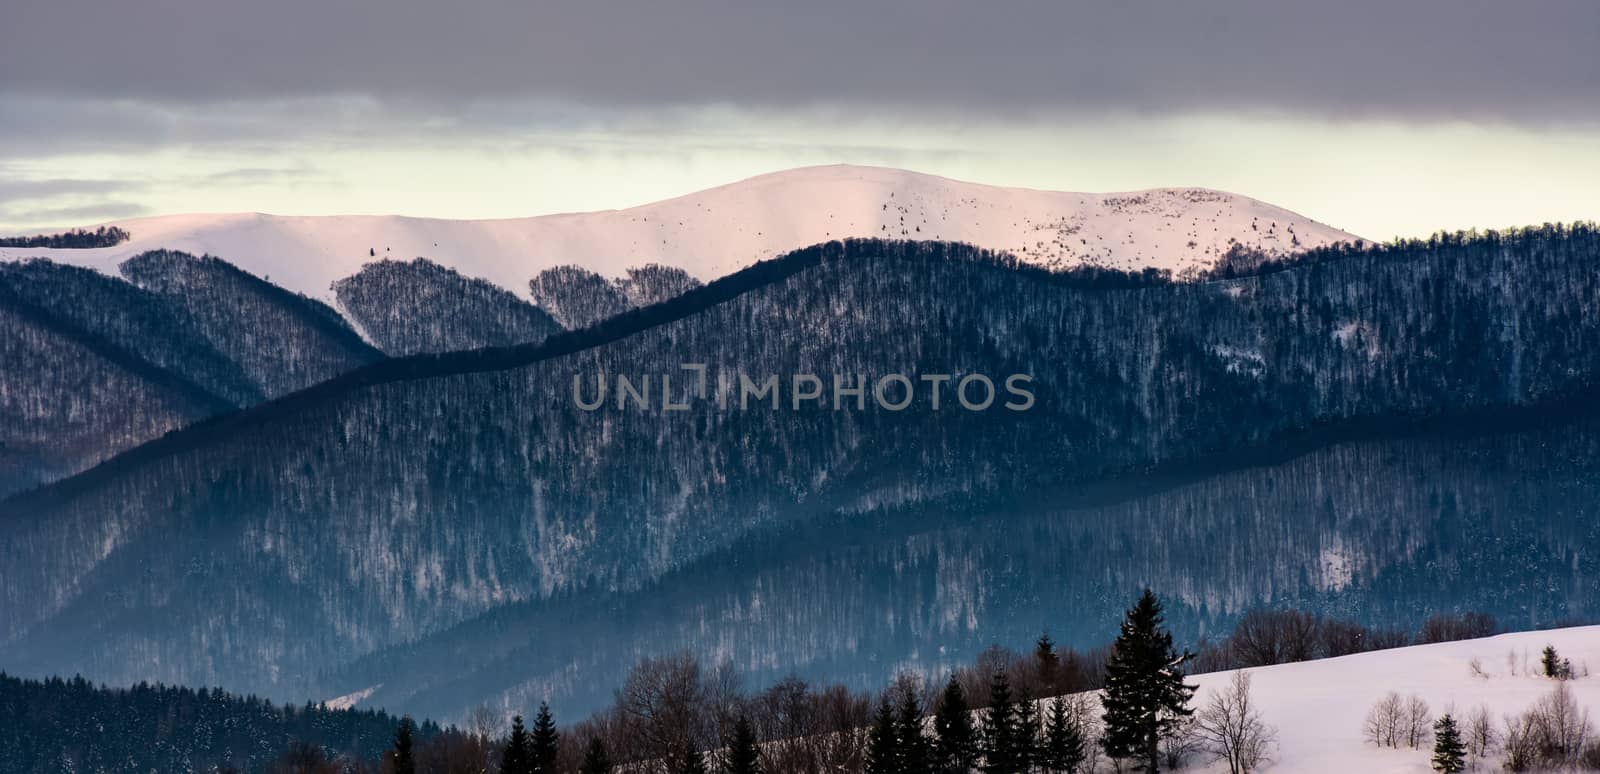 forested mountain ridge with snowy tops at dawn. beautiful nature scenery in winter